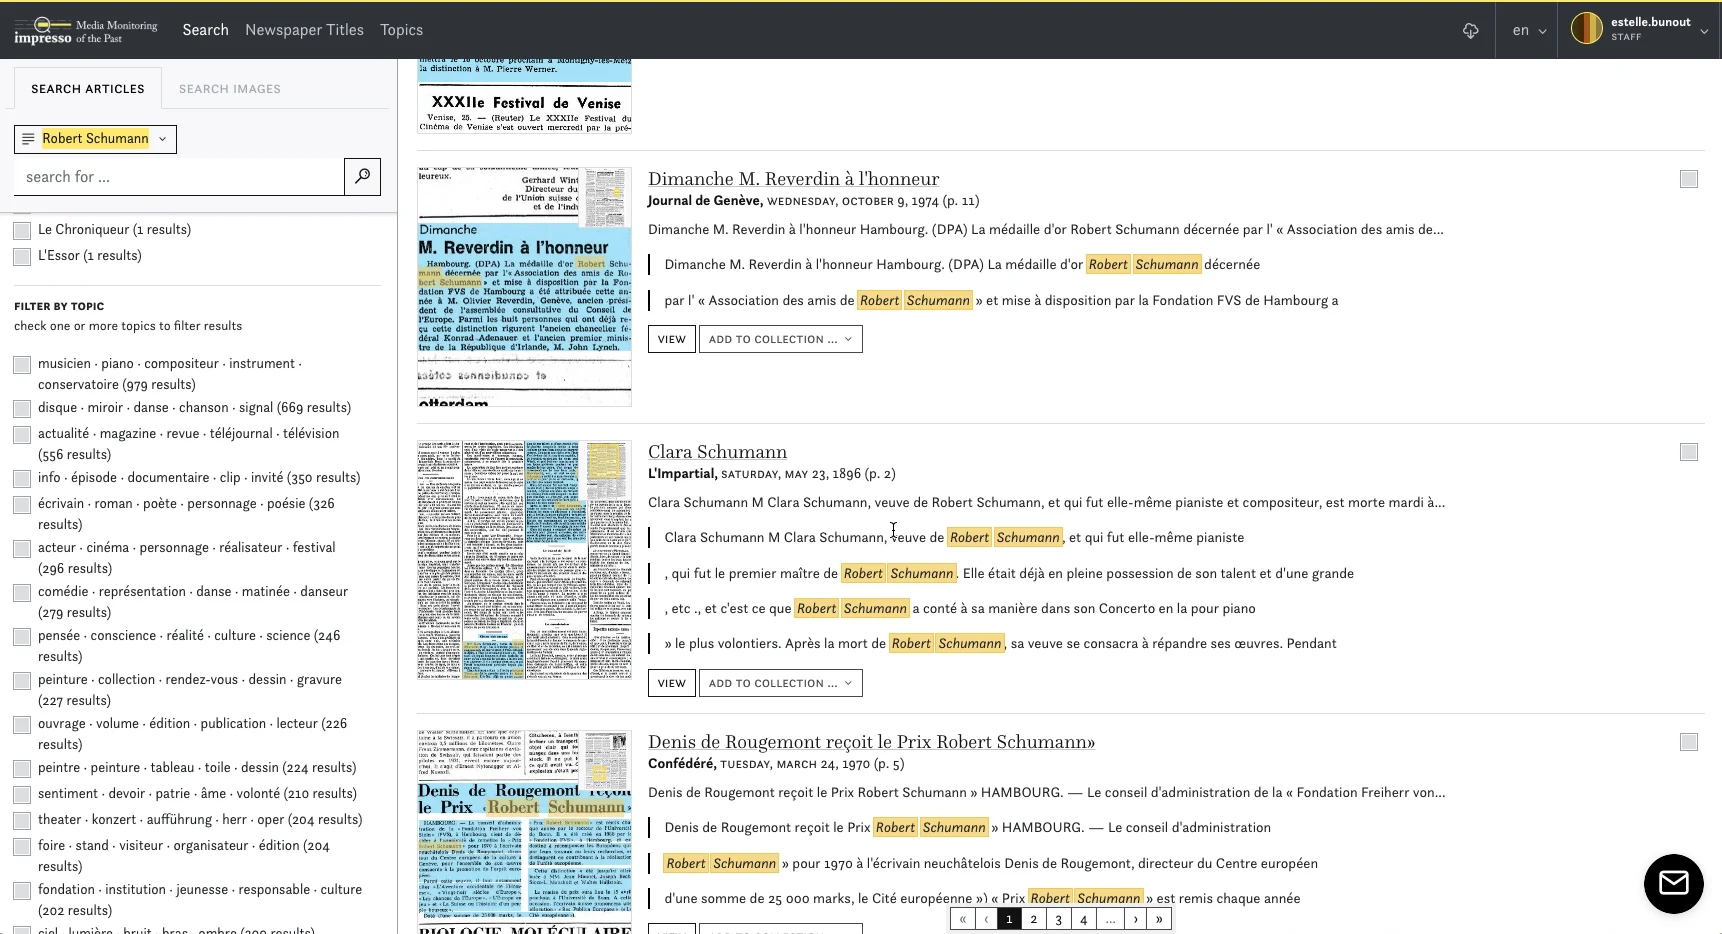 Who is mentioned in the newspapers on the impresso interface? on Vimeo